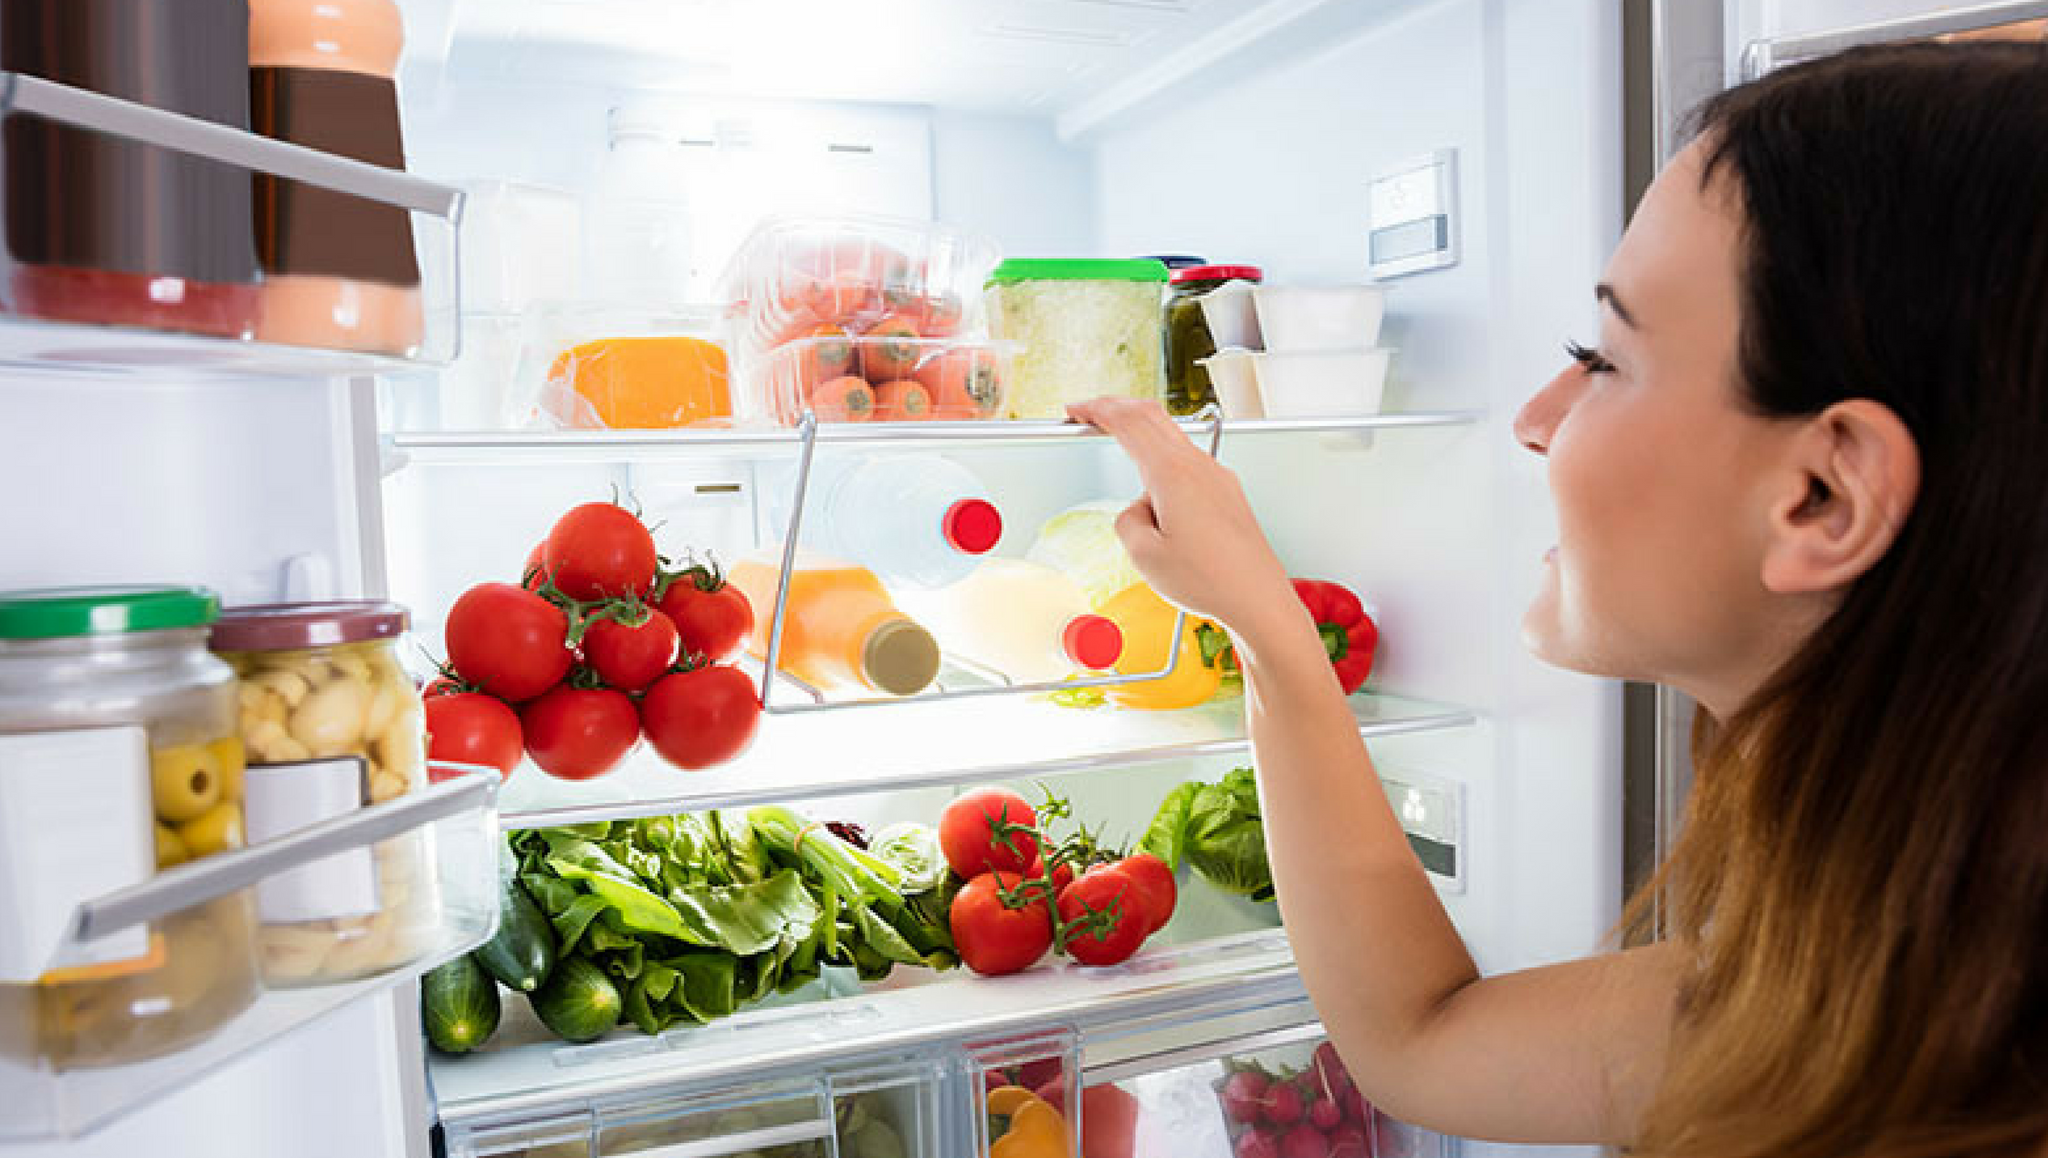 Food waste happens in the fridge, so use that space wisely! | Sustainable Connections